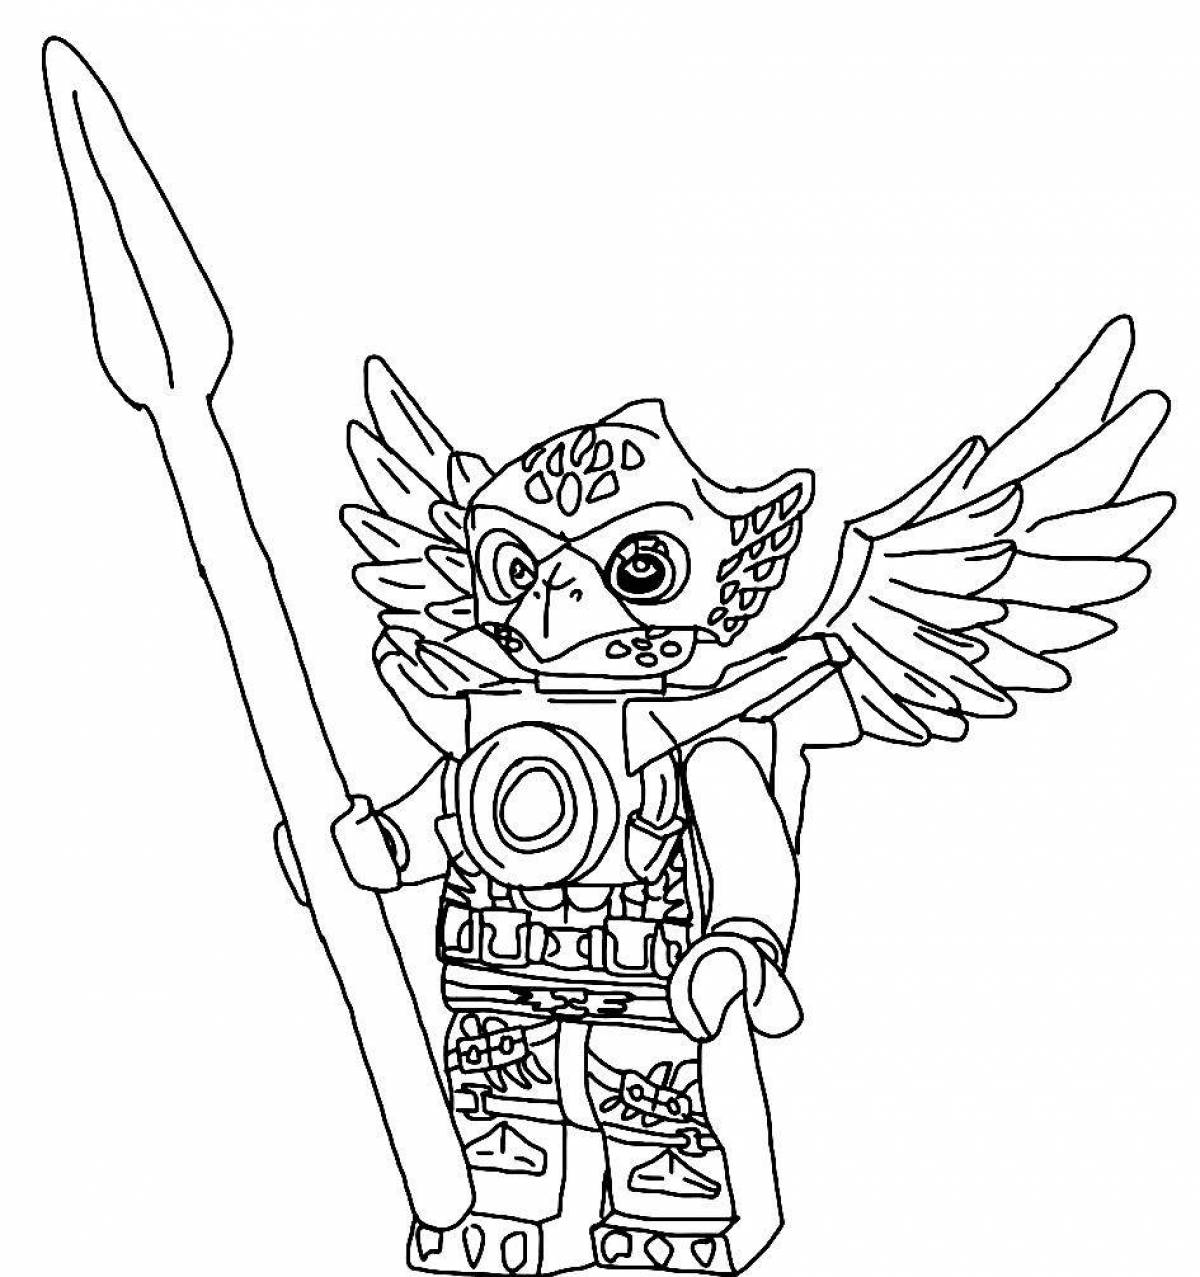 Fun monkart coloring page for kids